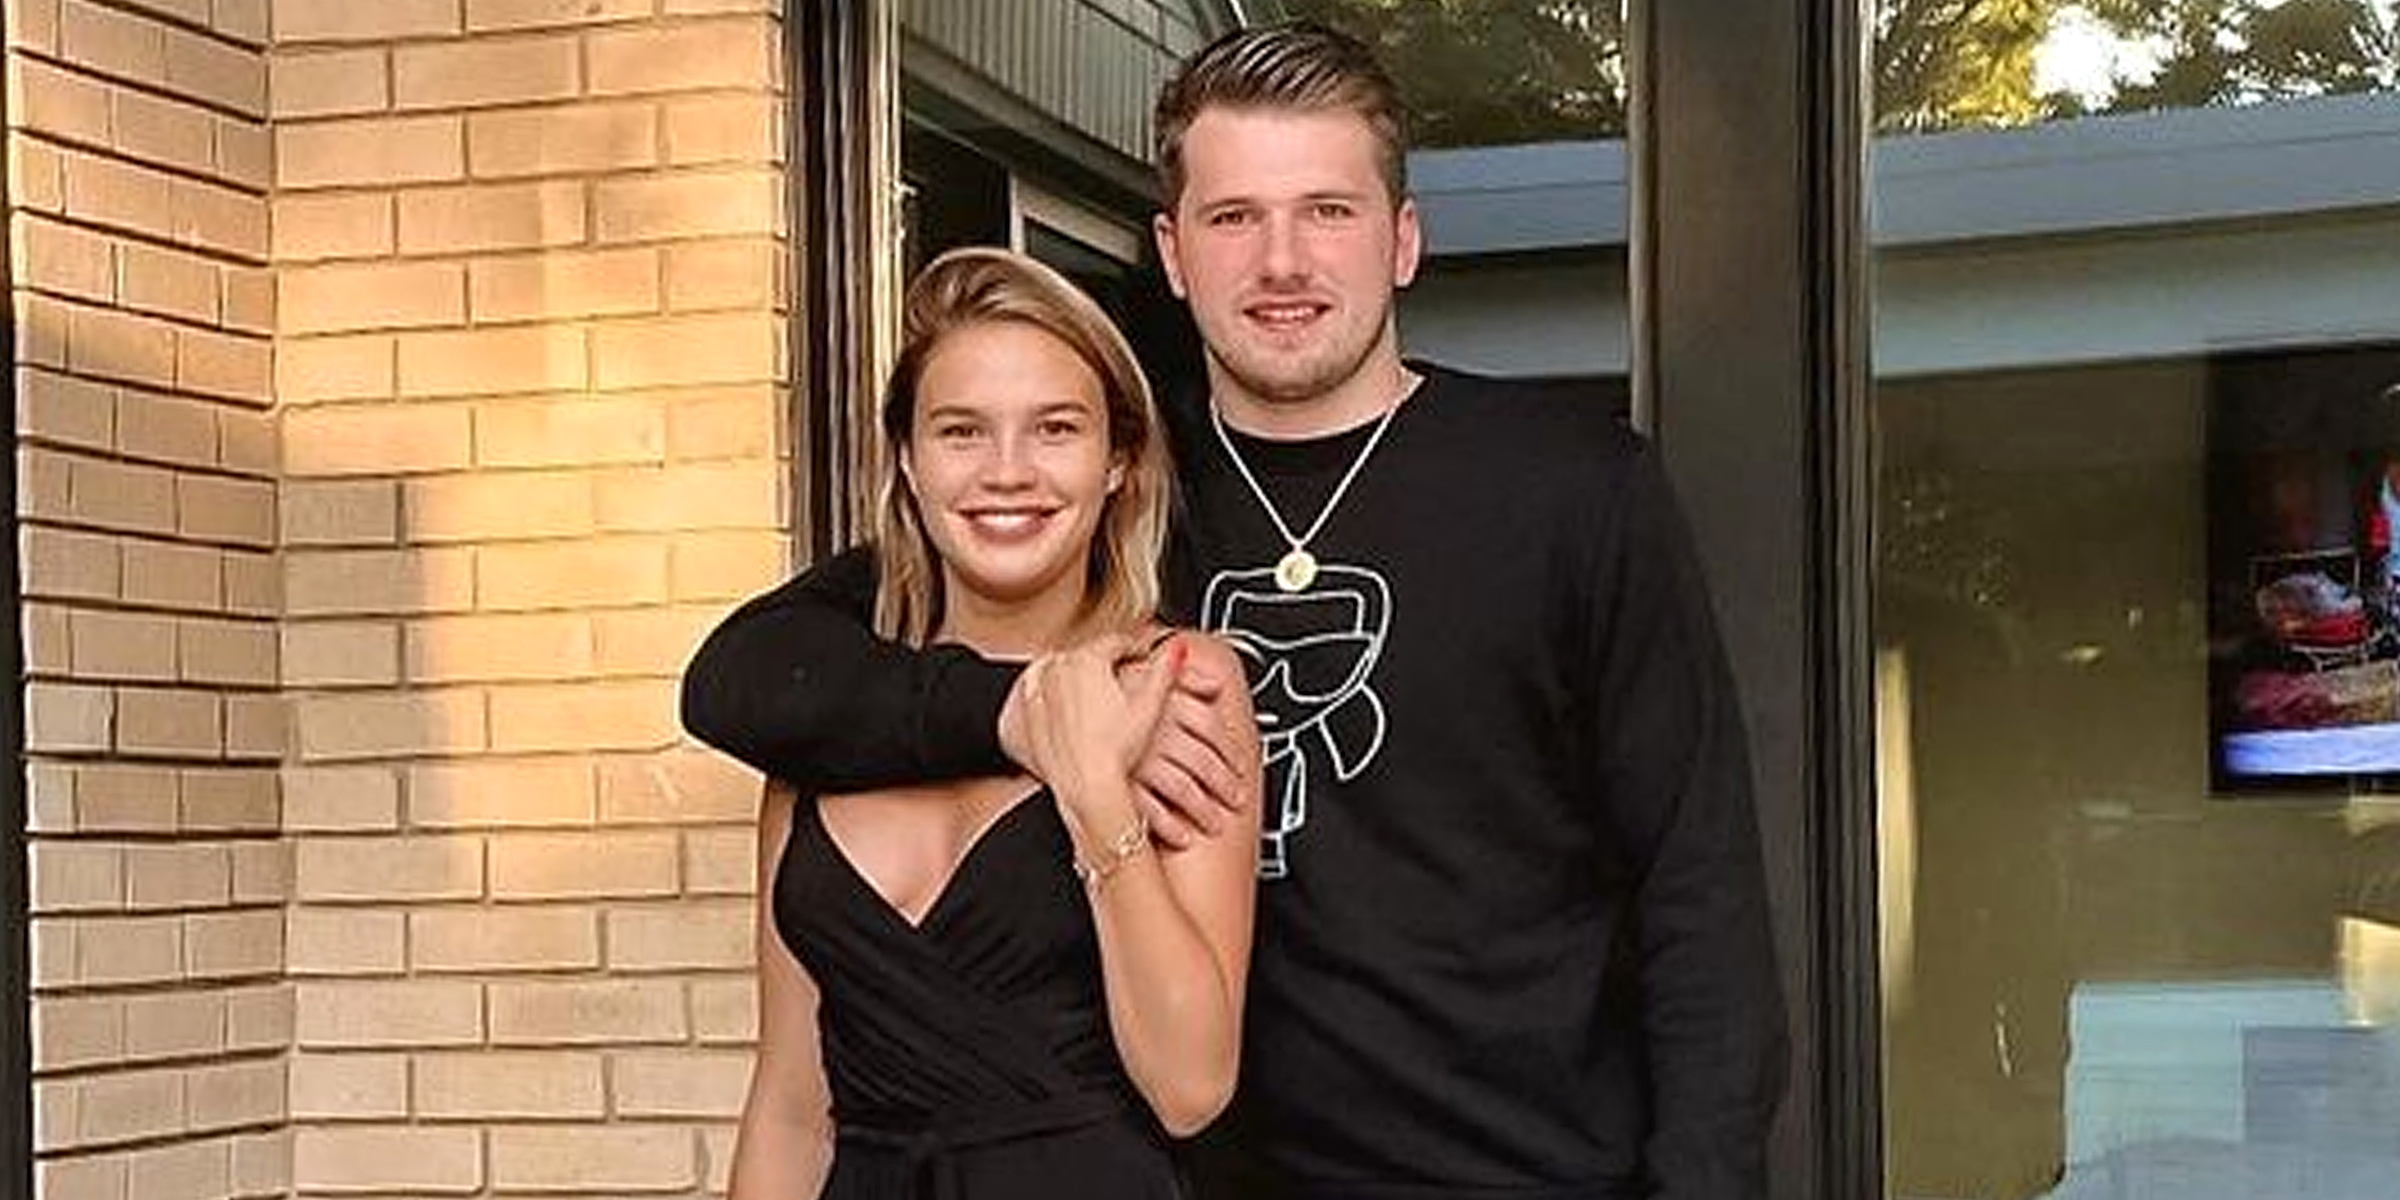 Anamaria Goltes and Luka Dončić | Source: Instagram/anamariagoltes